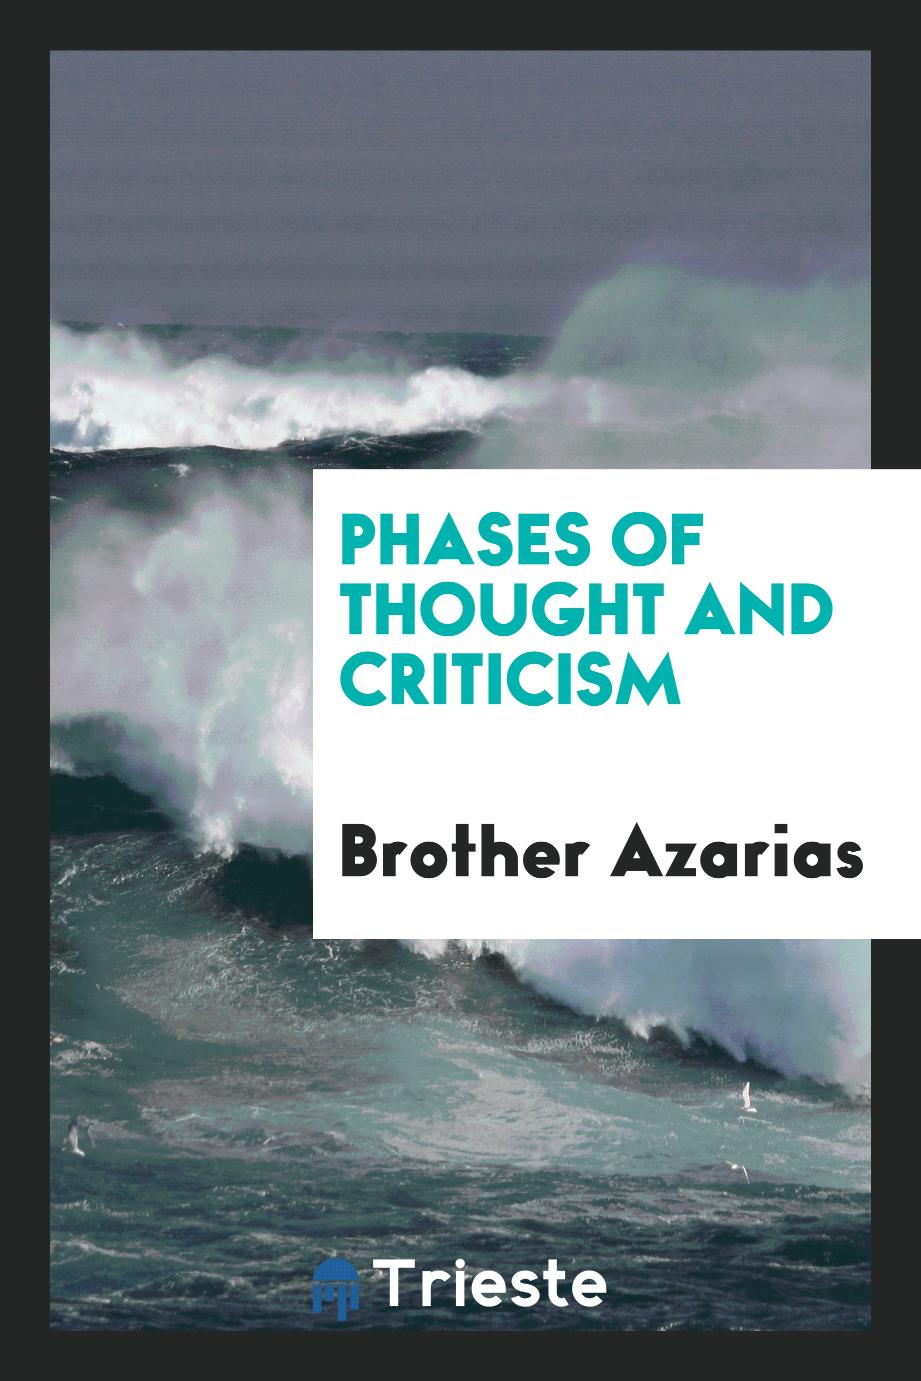 Phases of thought and criticism